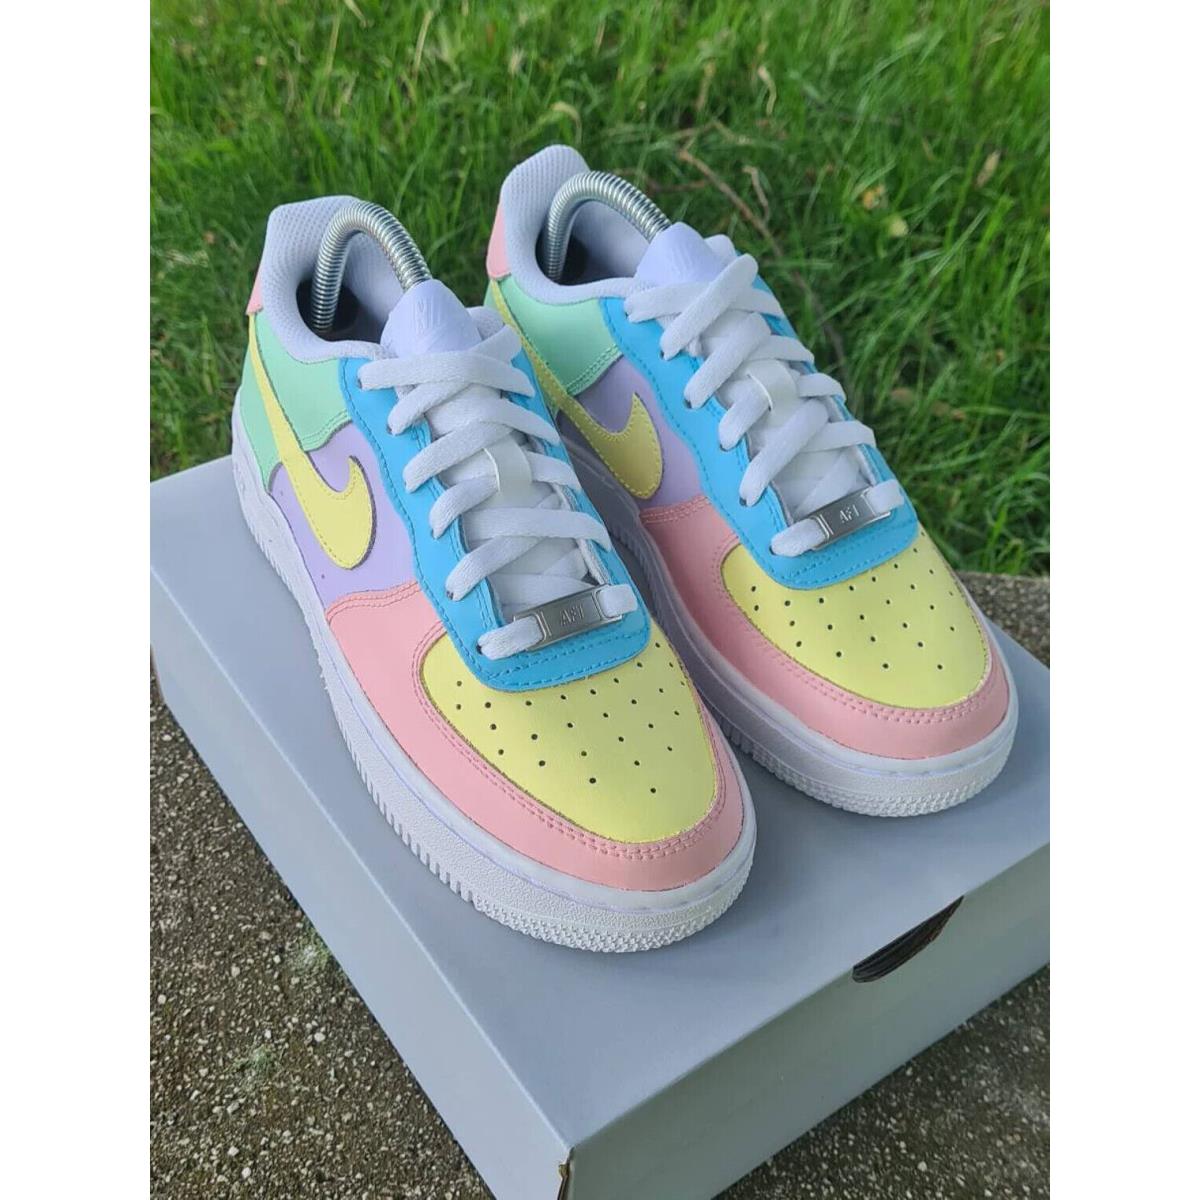 Nike Air Force 1 Custom Pastel Easter Shoes Green Blue Purple Yellow Pink White | 883212071408 - Nike shoes Air Force White , White Manufacturer | SporTipTop